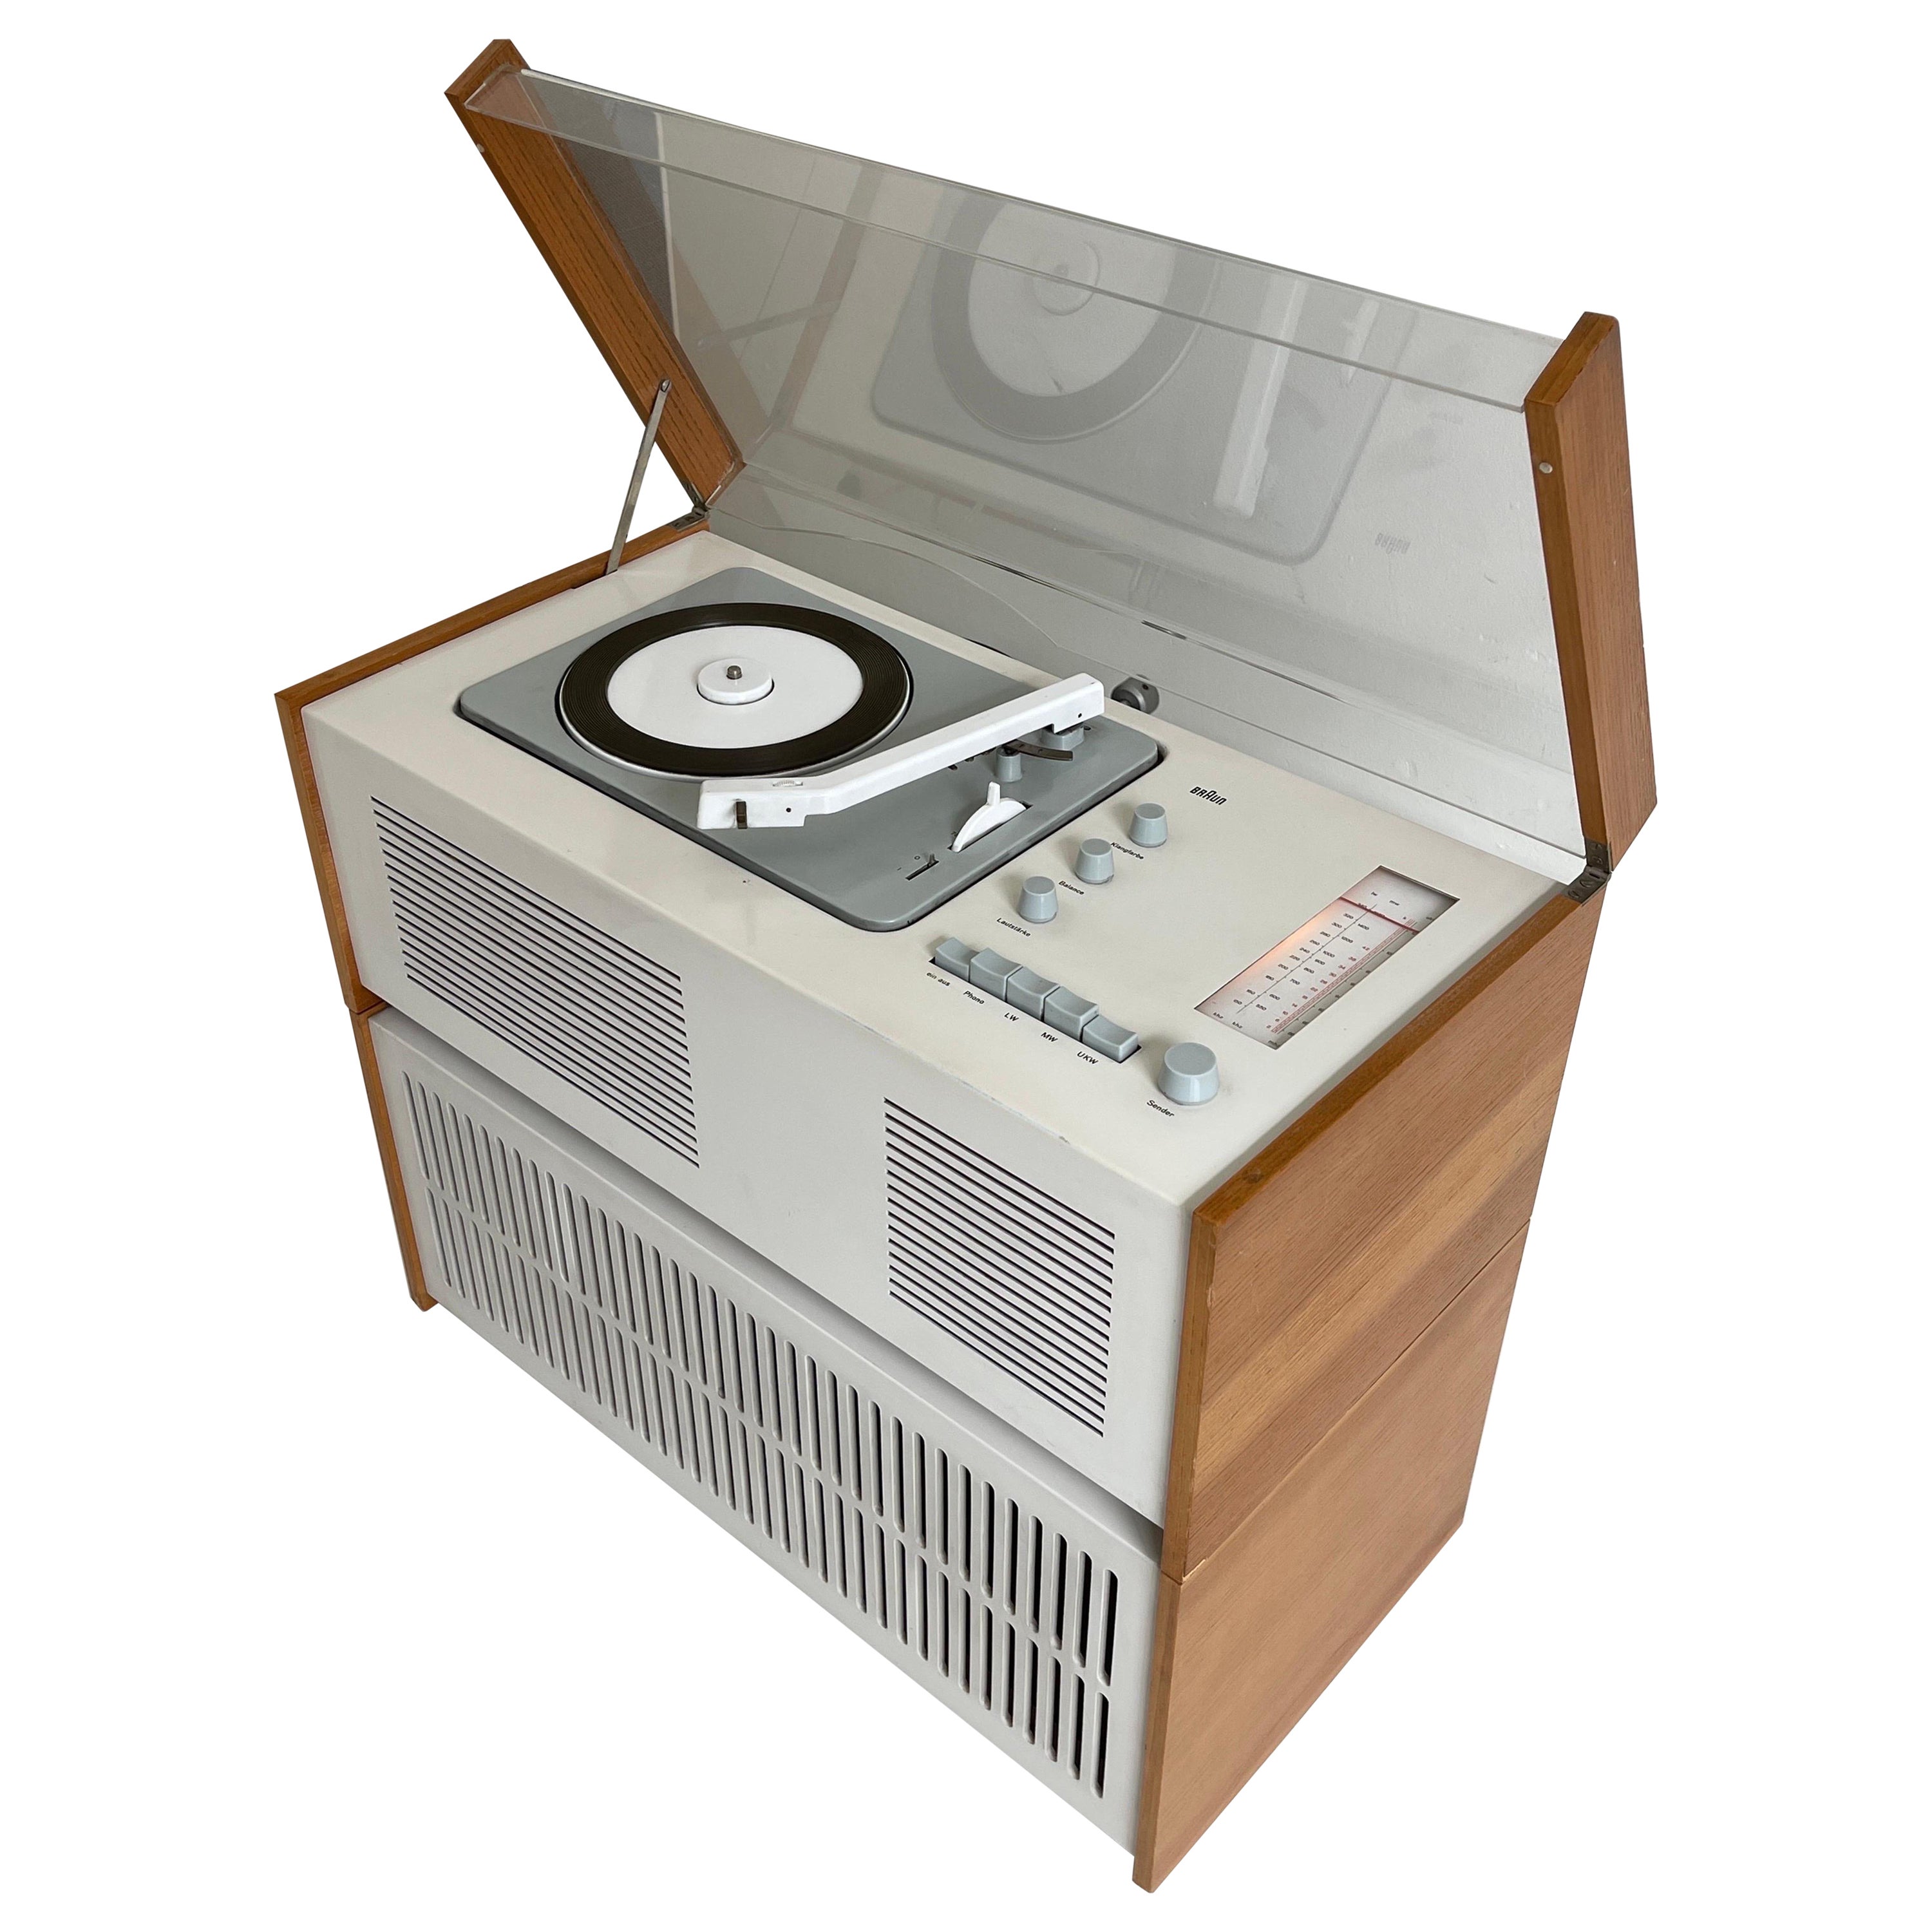 Braun SK61 Record Player and L1 floor speaker by Dieter Rams